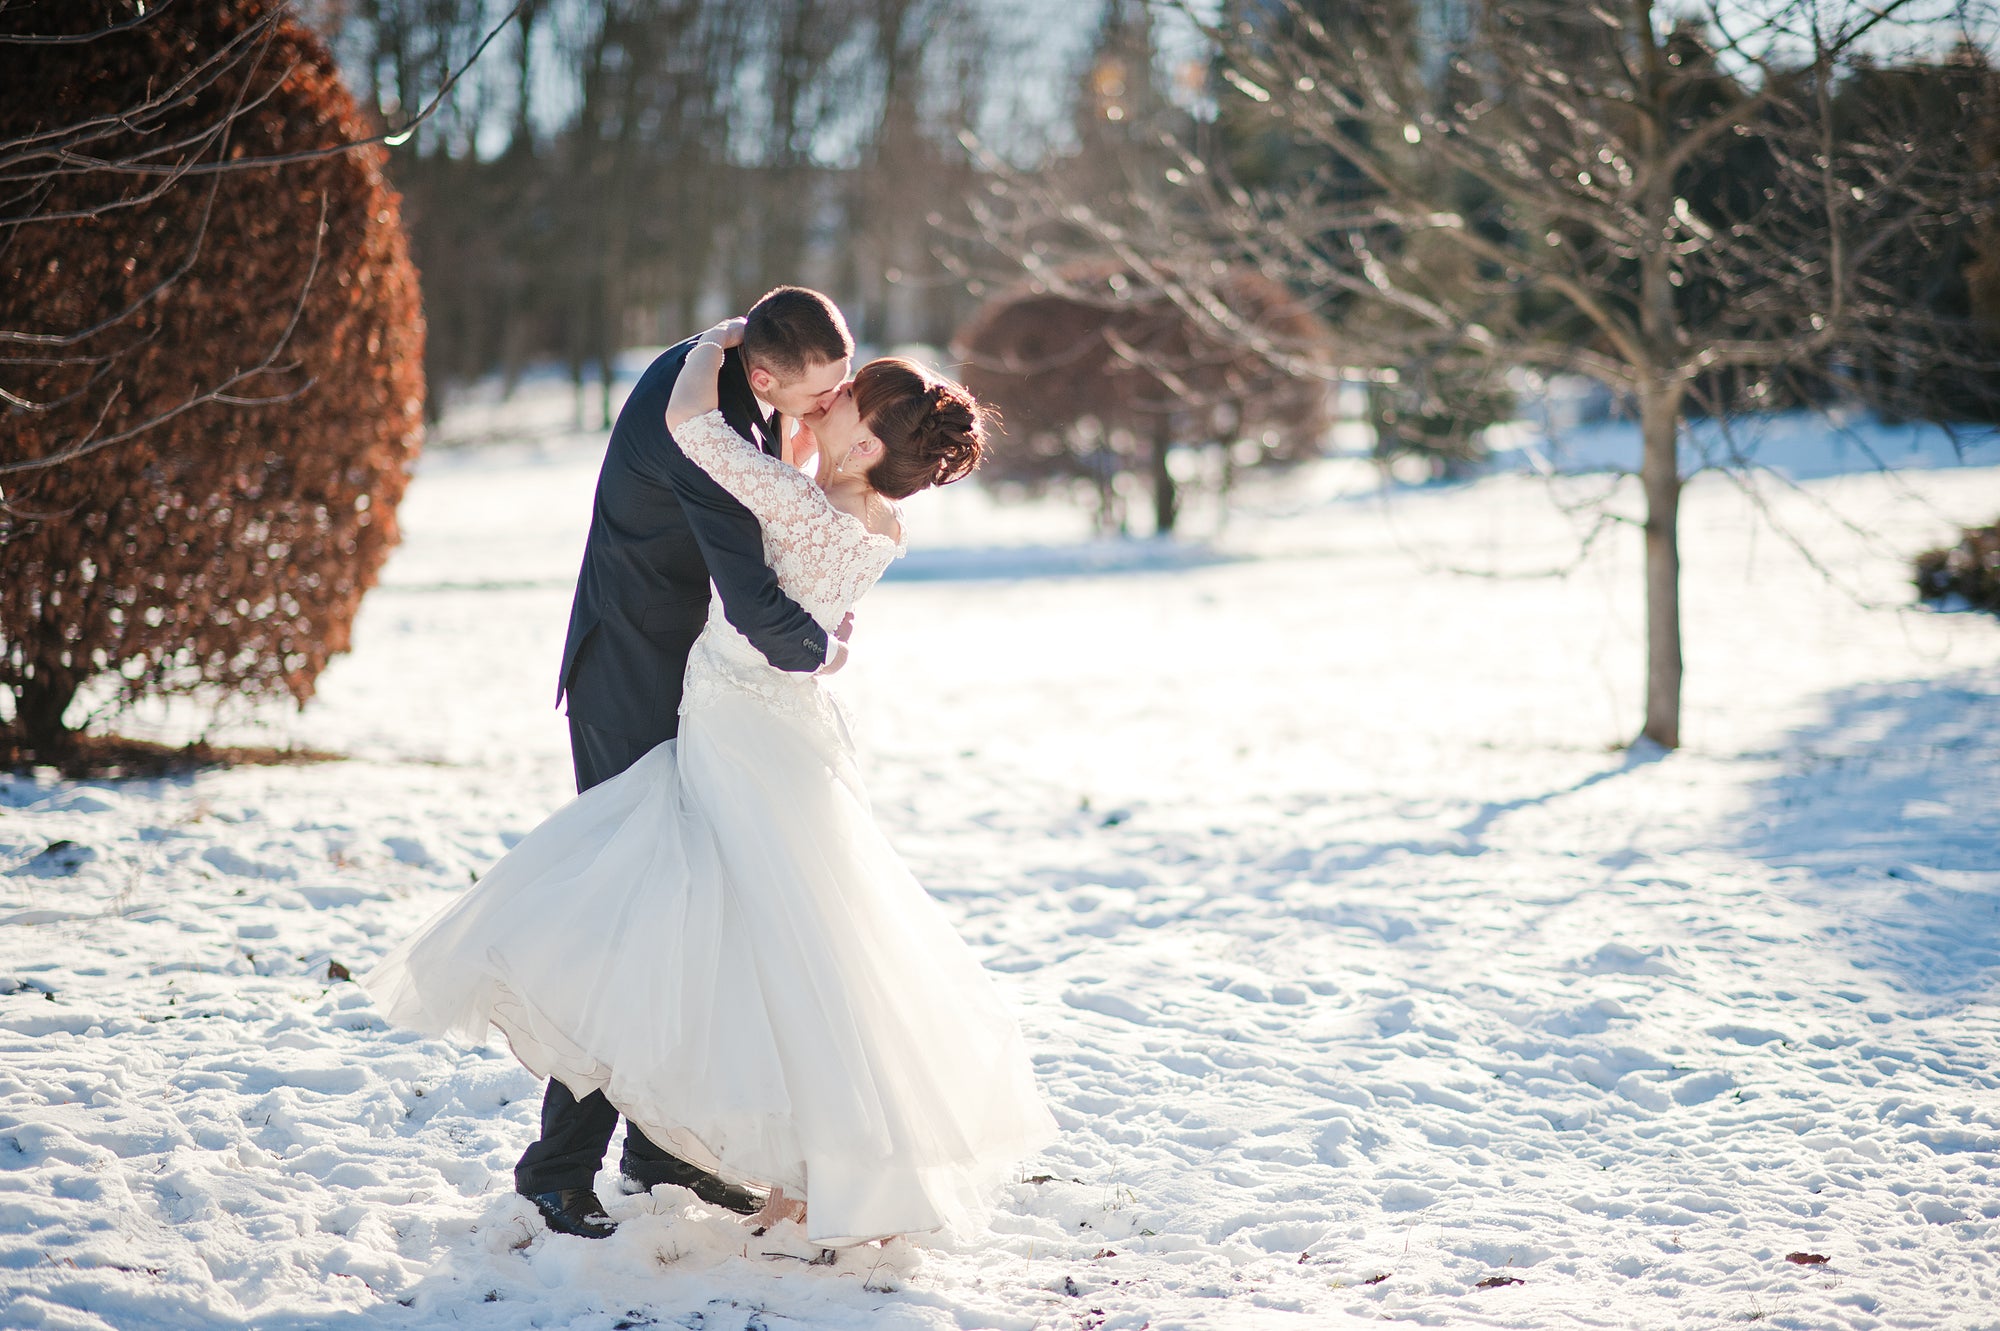 The Ultimate Guide to Planning a Winter Wedding